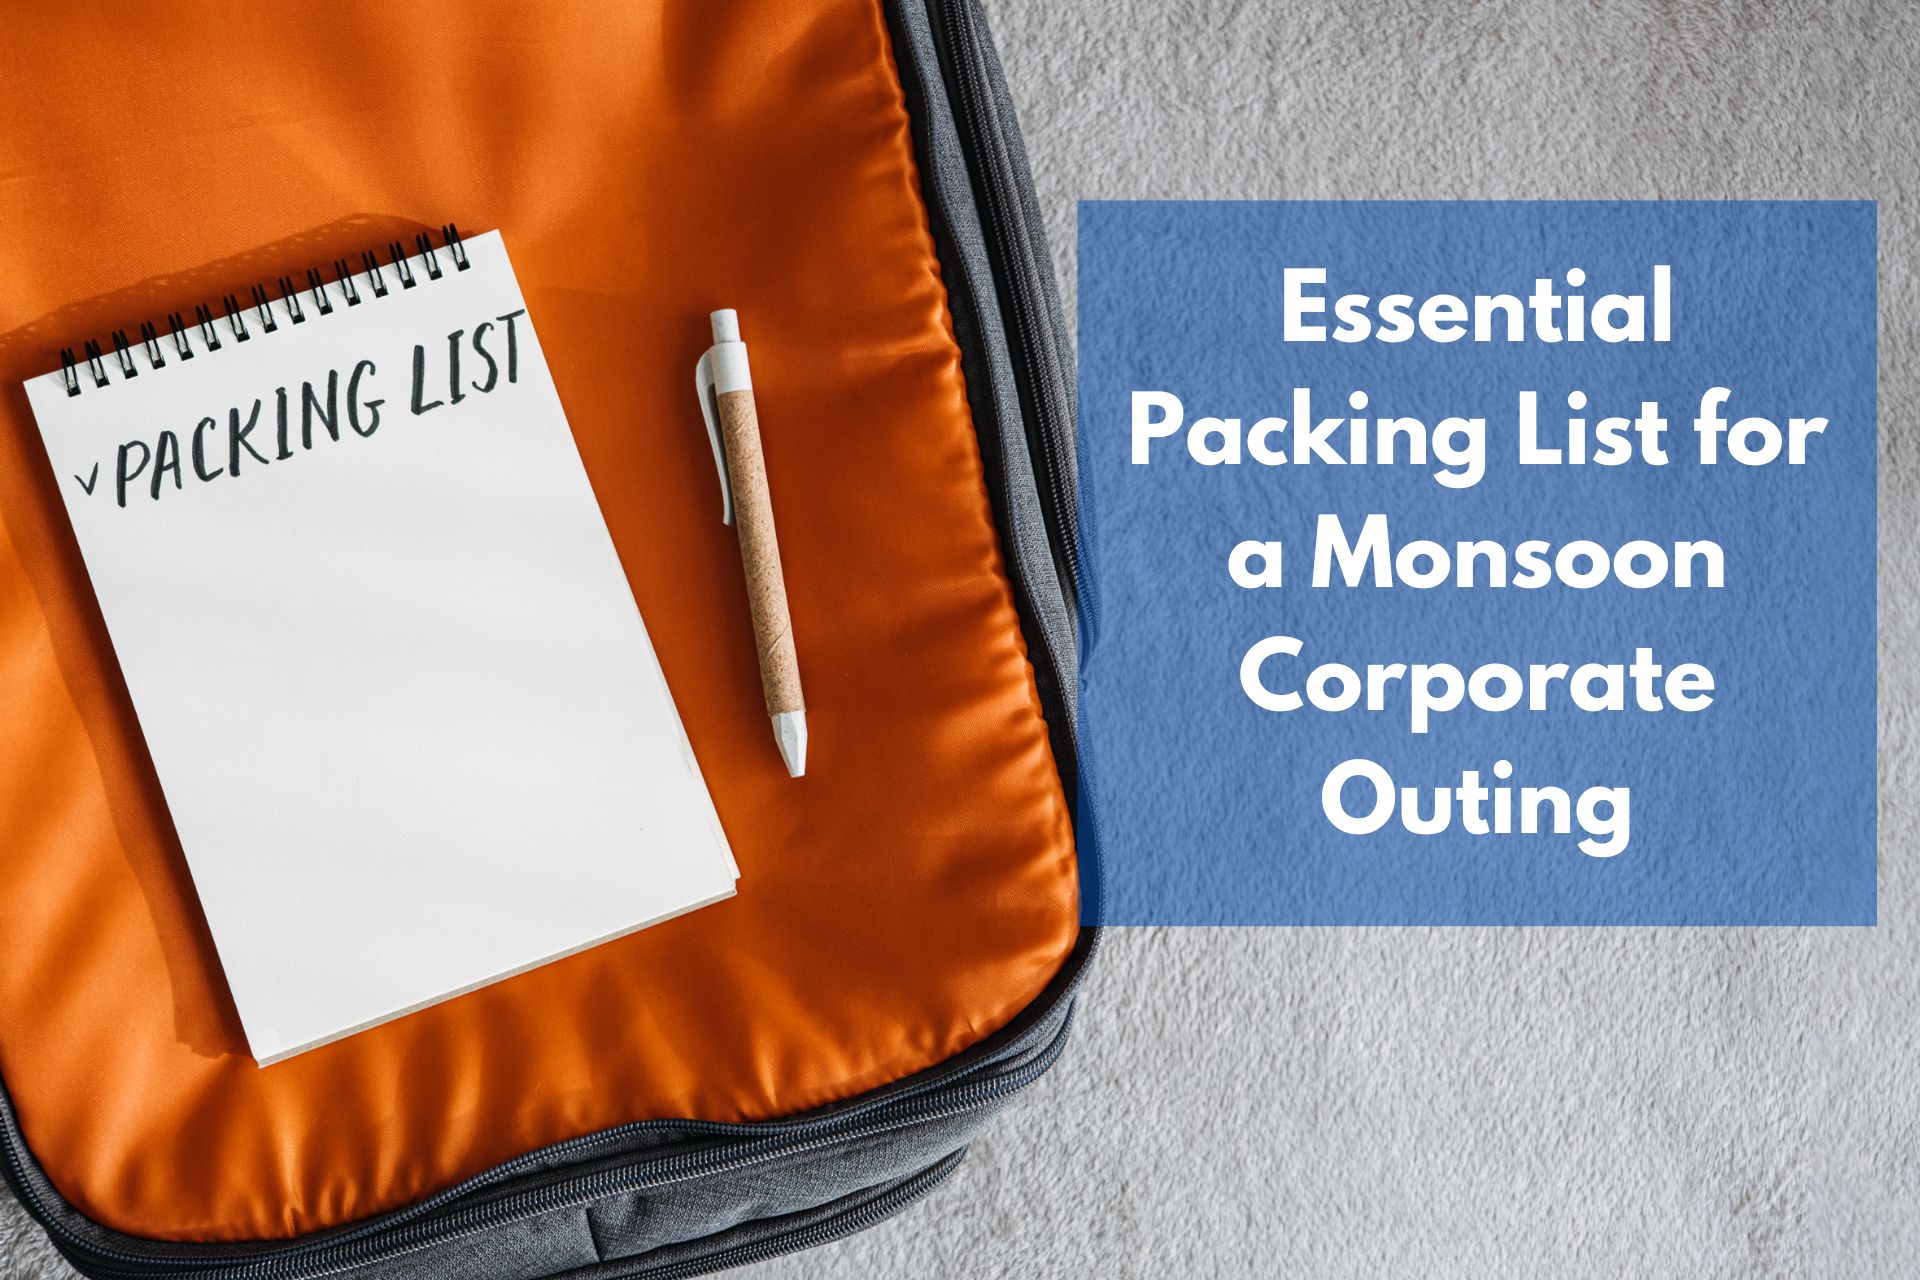 Essential Packing List for a Monsoon Corporate Outing